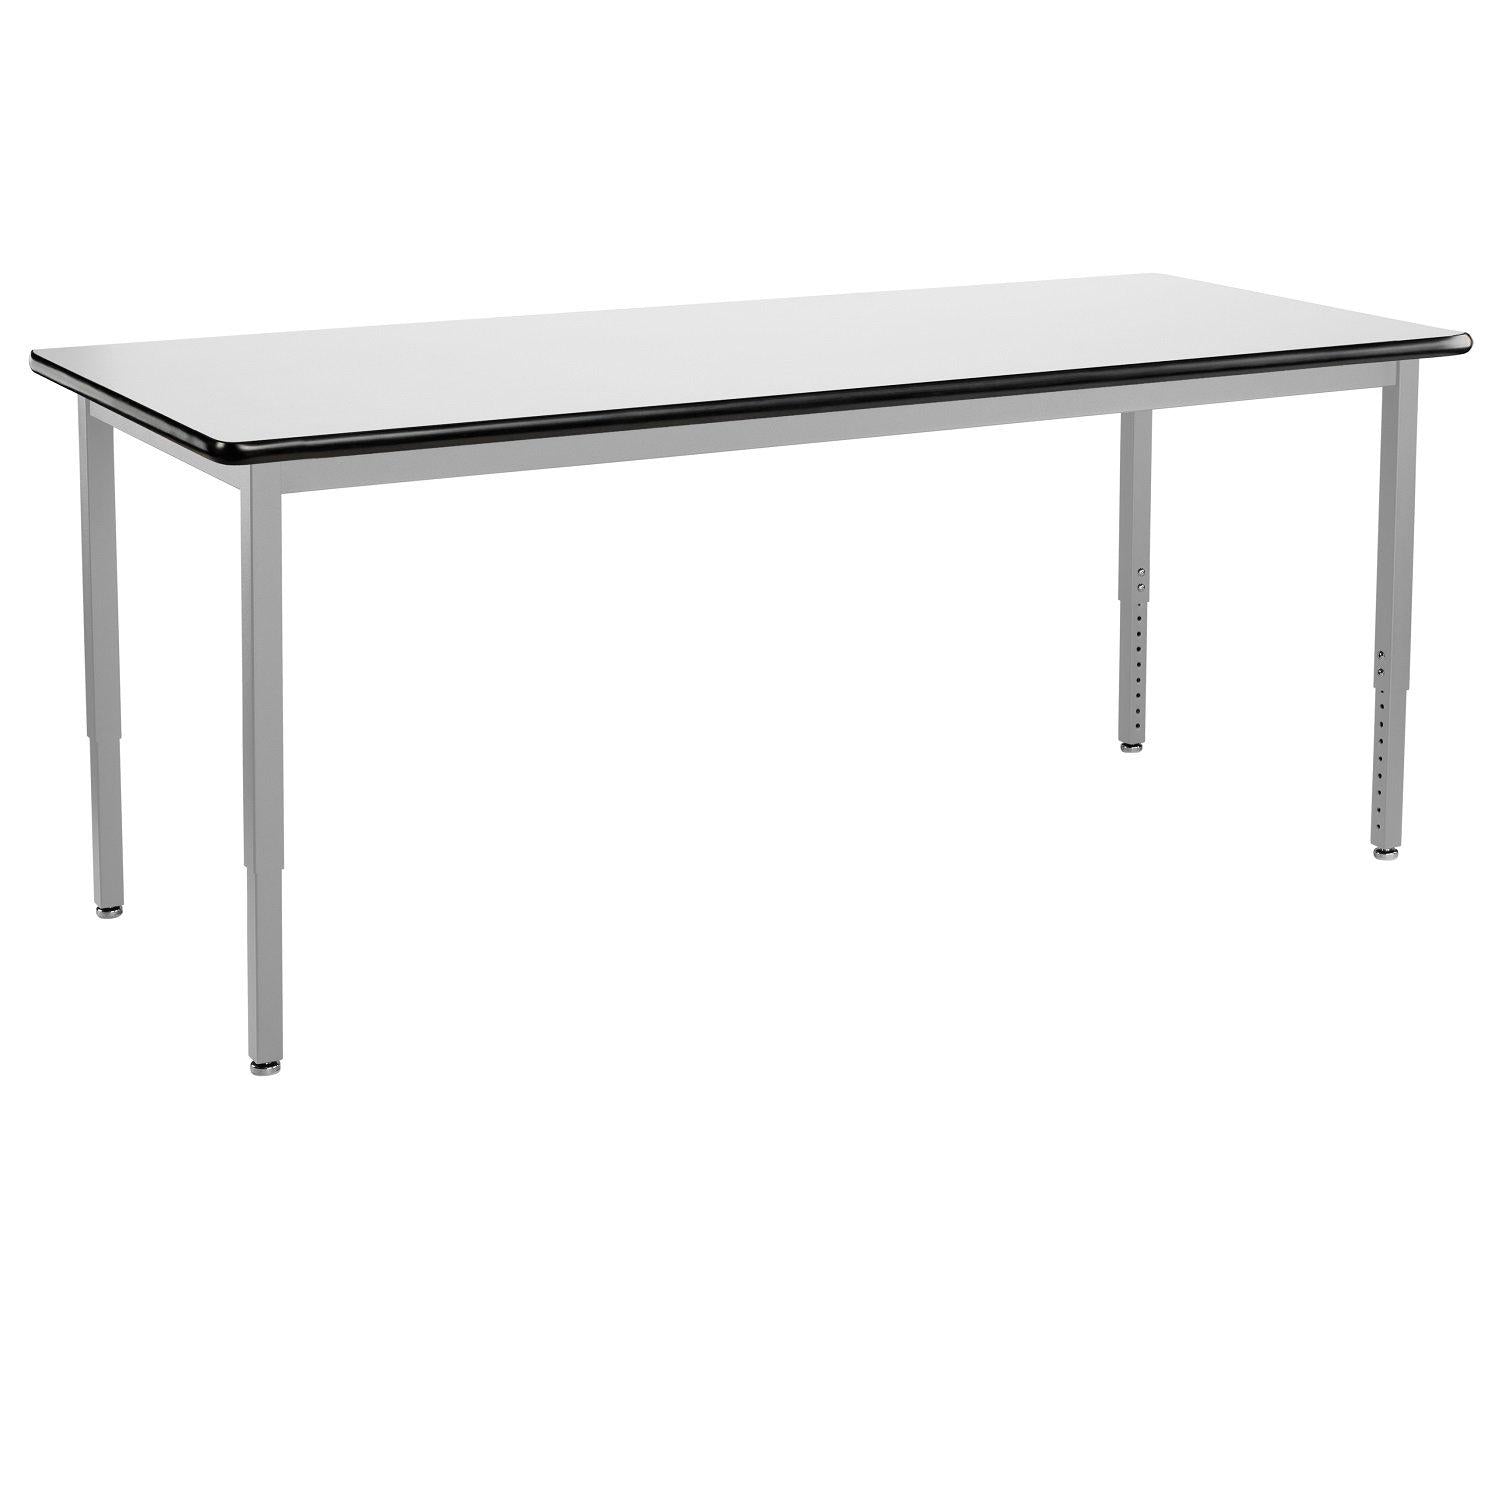 Heavy-Duty Height-Adjustable Utility Table, Soft Grey Frame, 30" x 84", Whiteboard High-Pressure Laminate Top